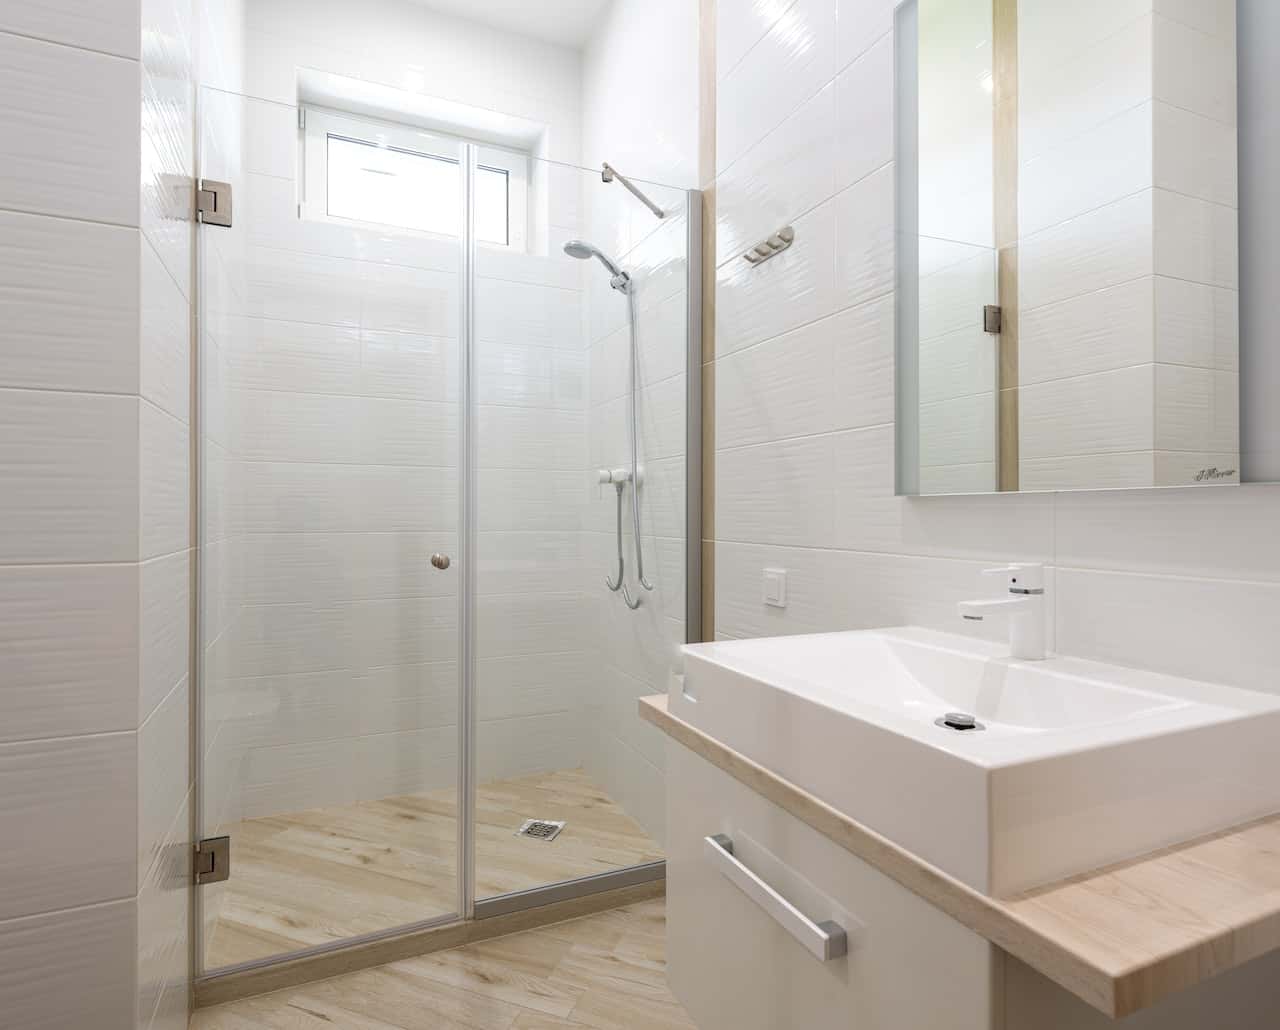 frosted glass design idea for bathroom